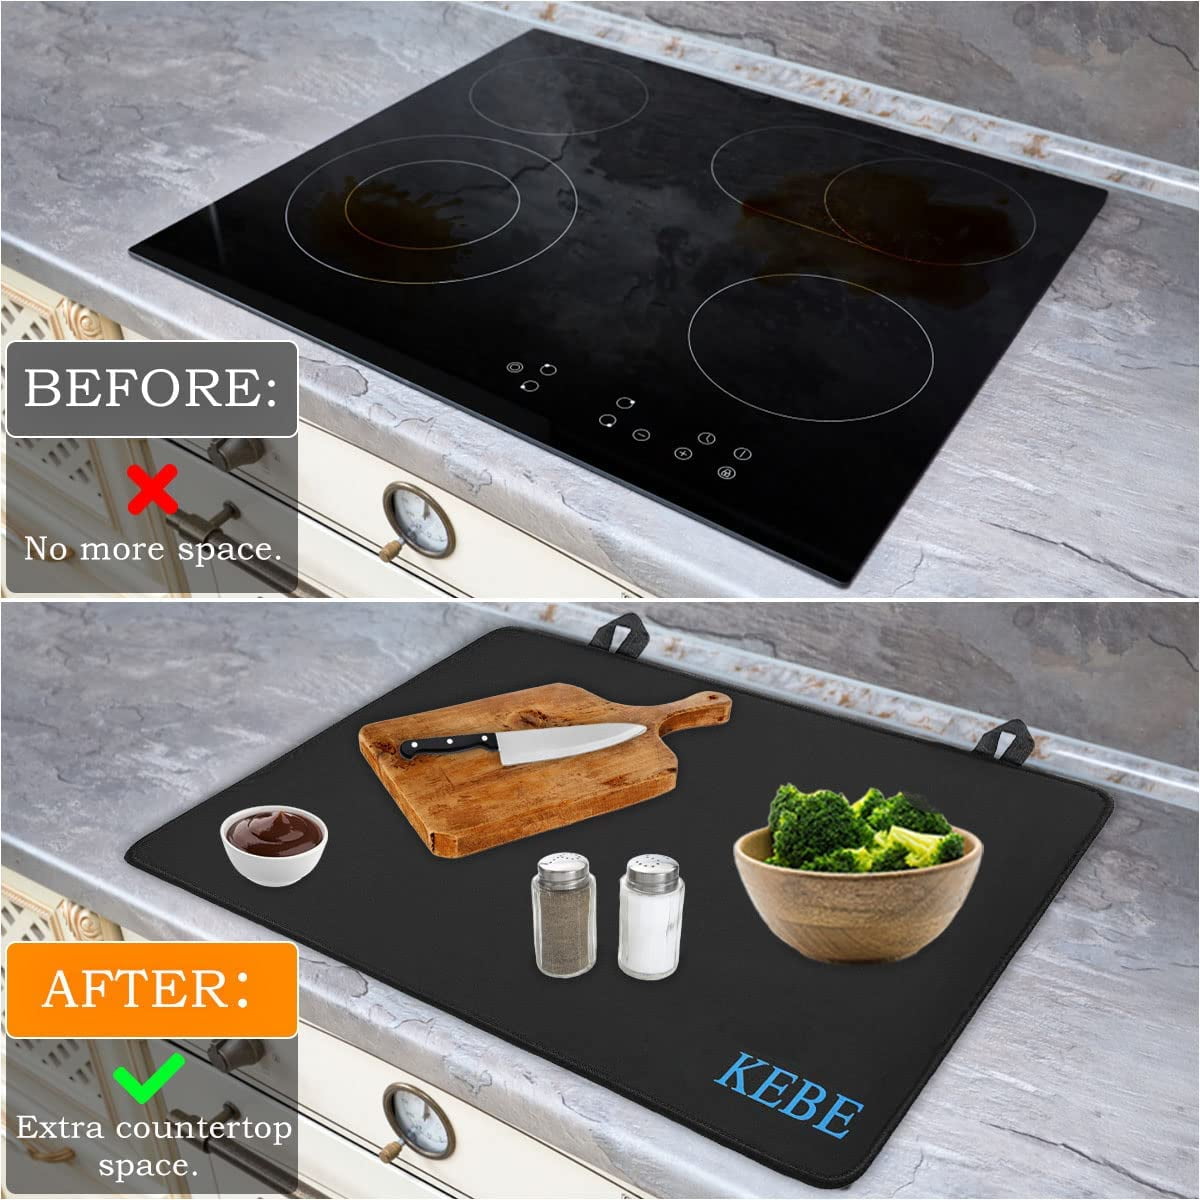 Stove Top Cover, 30.4 inch x 21.5 inch Electric Stove Cover Mat, Ceramic Glass Stove Protector, Washable Rubber Stove Protector Keep Stove Clean